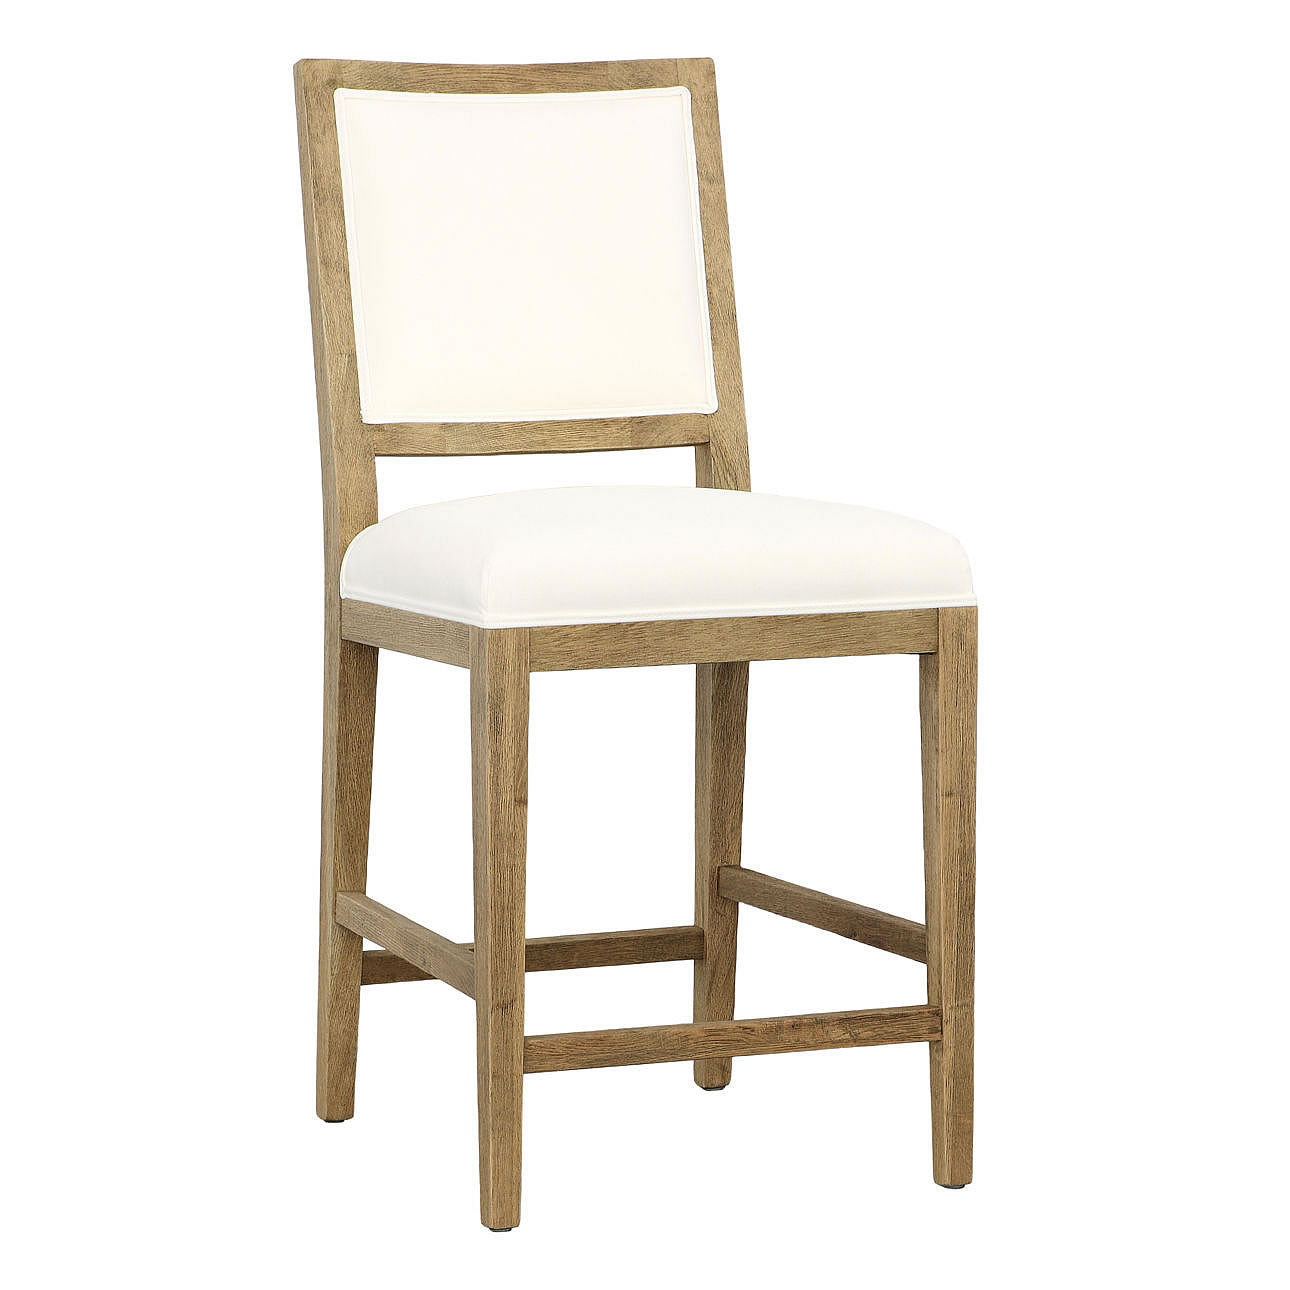 stanley-barstool-in-oatmeal-fabric-damask-stone-wash-finish-and-bronze-nail-trim